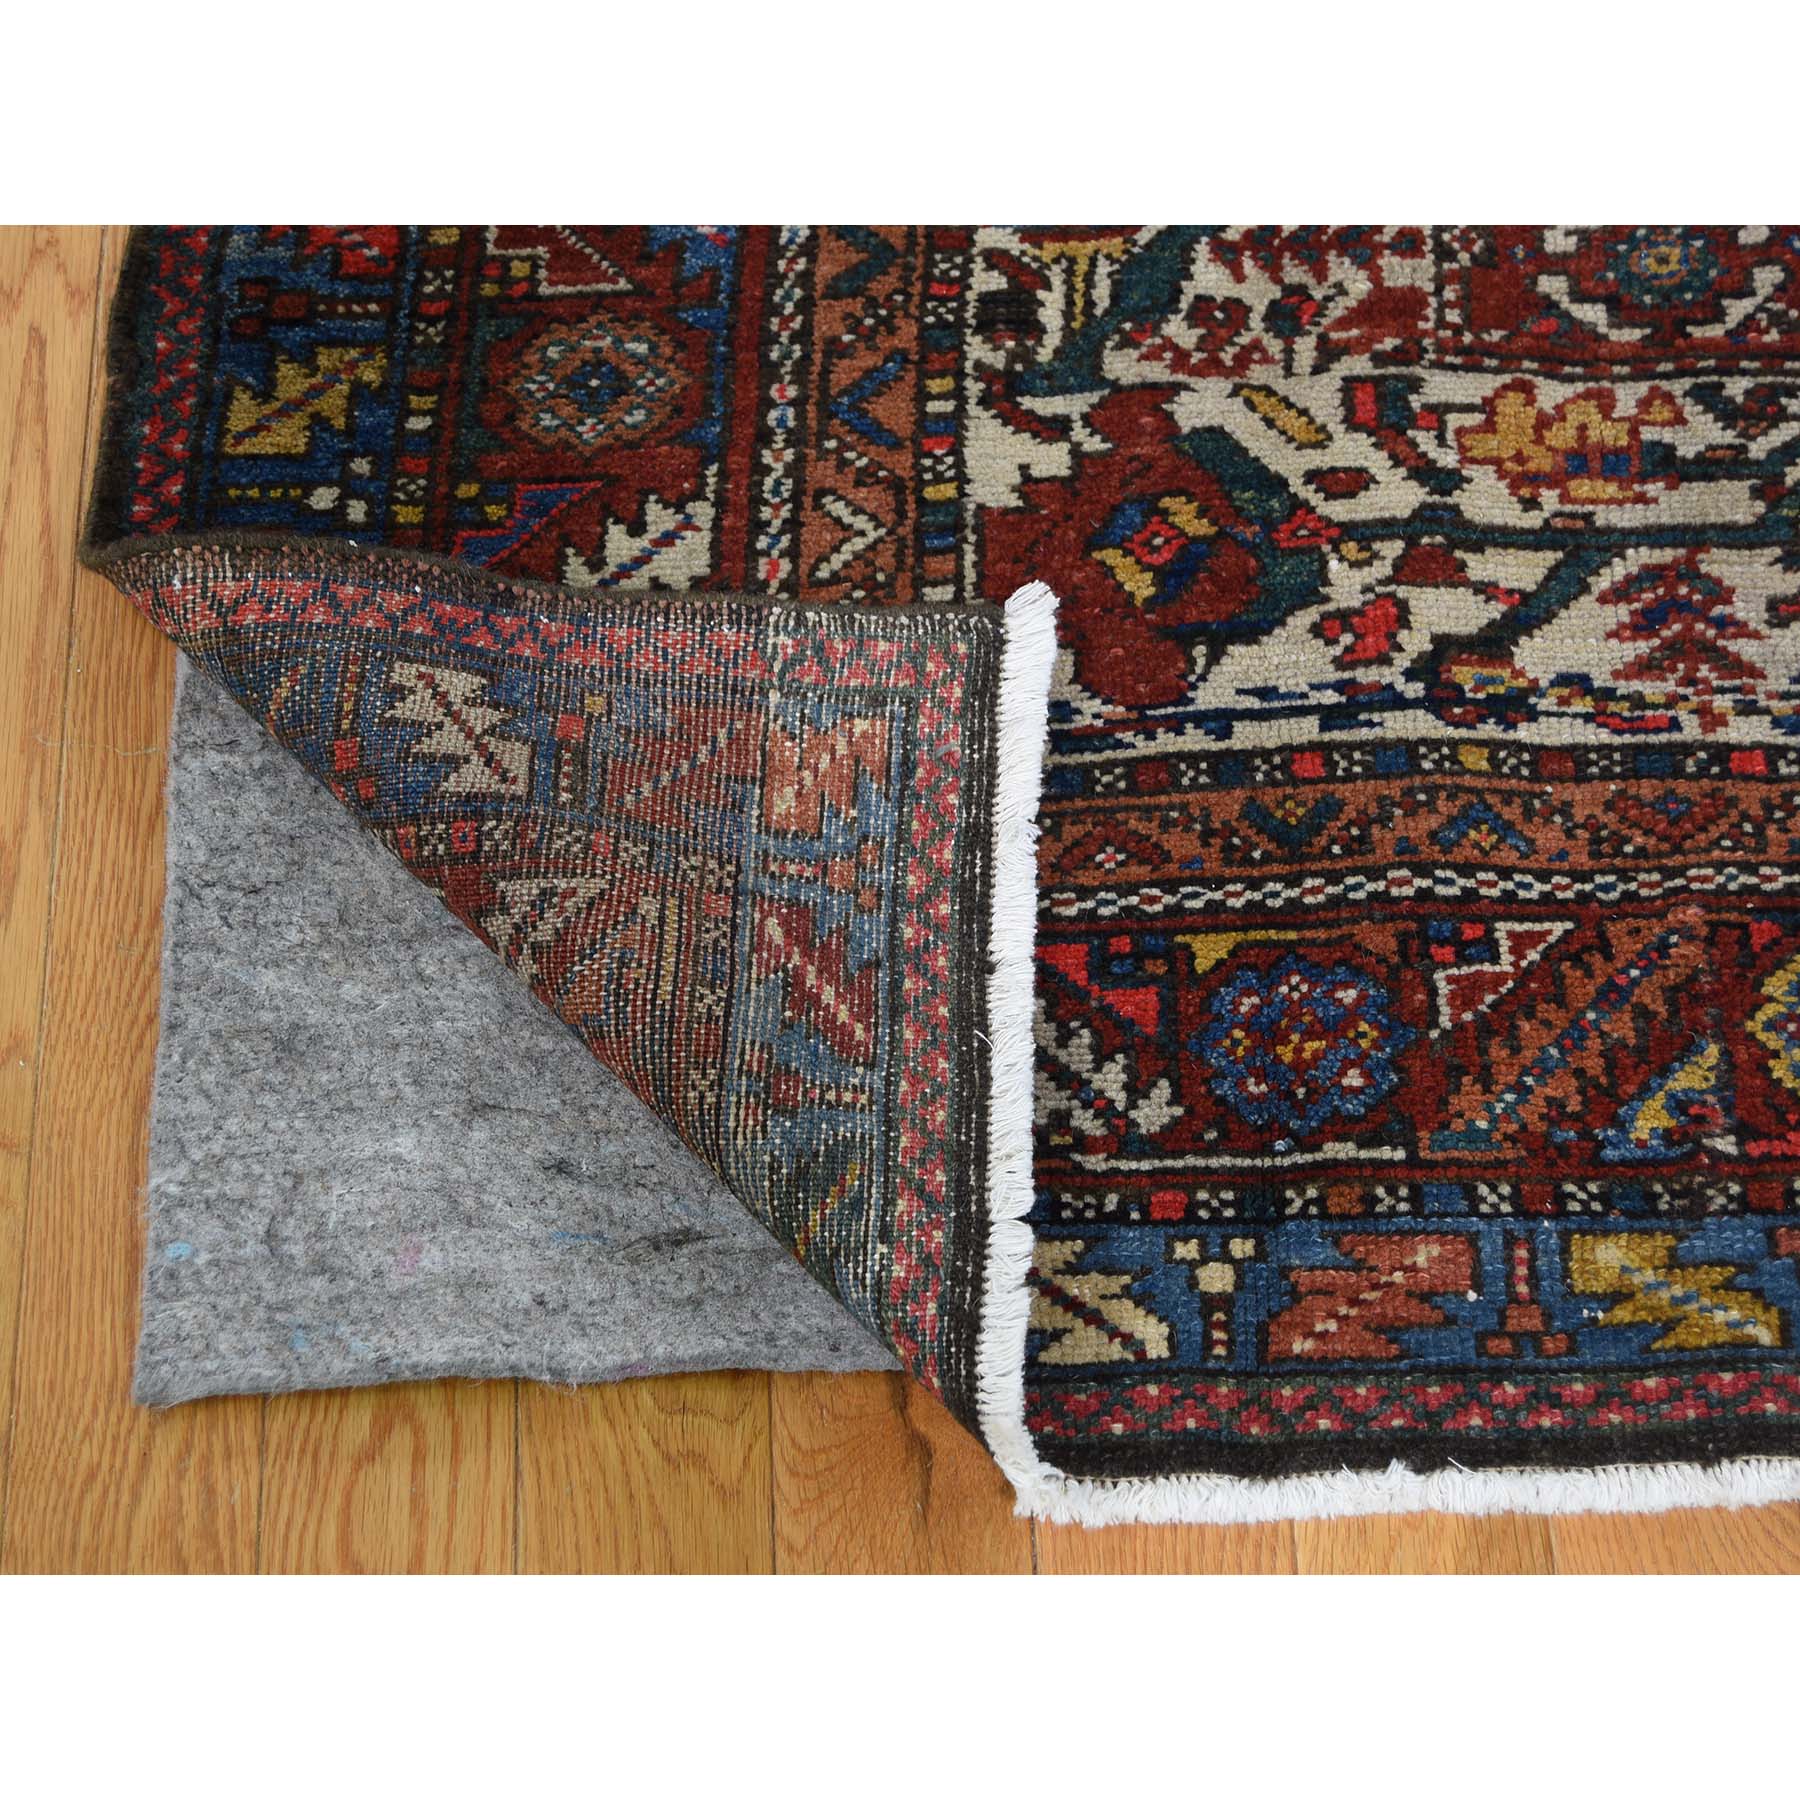 6-8 x12-8  Red Gallery Size Antique Persian Bakhtiari Good Con. Full Pile Pure Wool Hand-Knotted Oriental Rug 